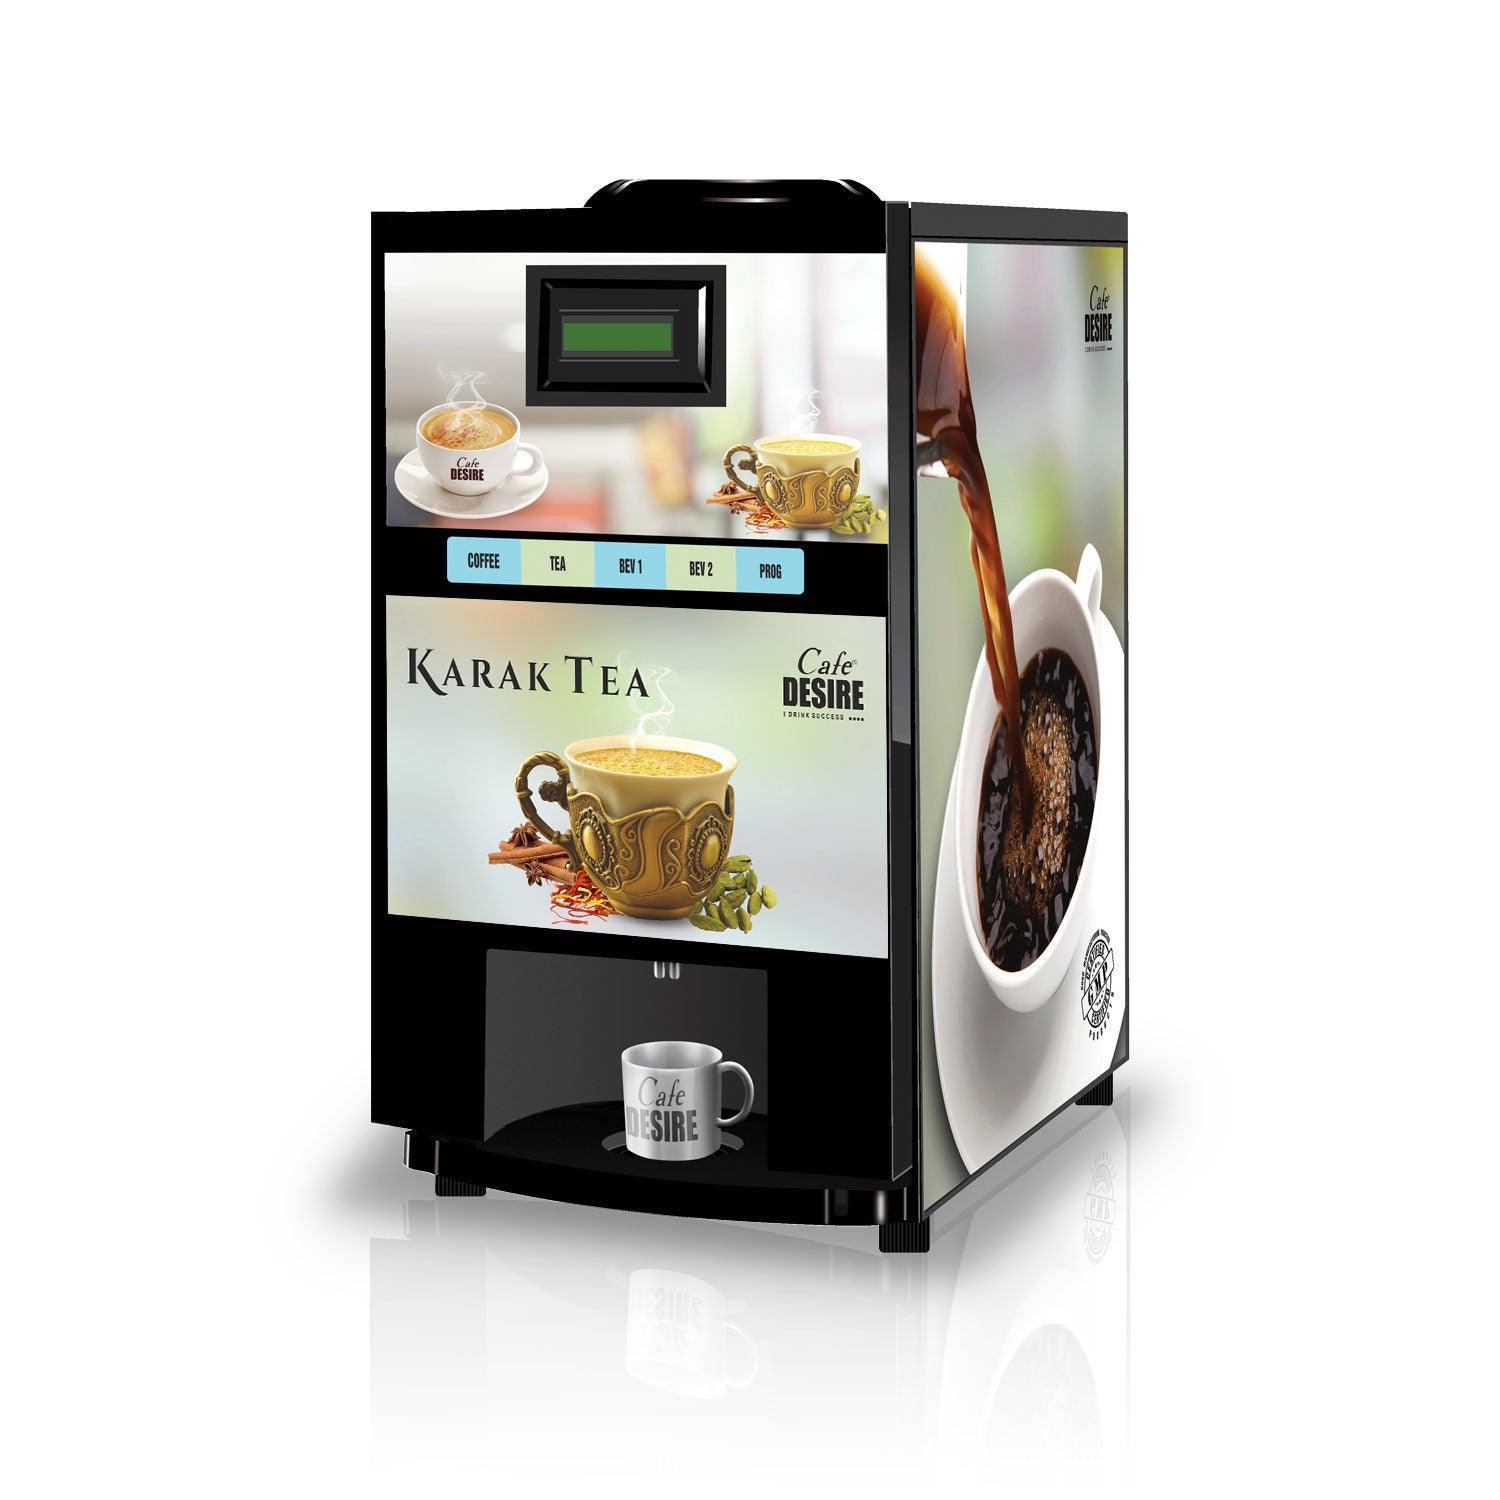 Coffee Machine 4 Lane | Four Beverage Options | Fully Automatic Tea & Coffee Vending Machine | For Offices, Shops and Smart Homes | Make 4 Varieties of Coffee Tea with Premix | No Milk, Tea, Coffee Powder Required - cd-usa.com